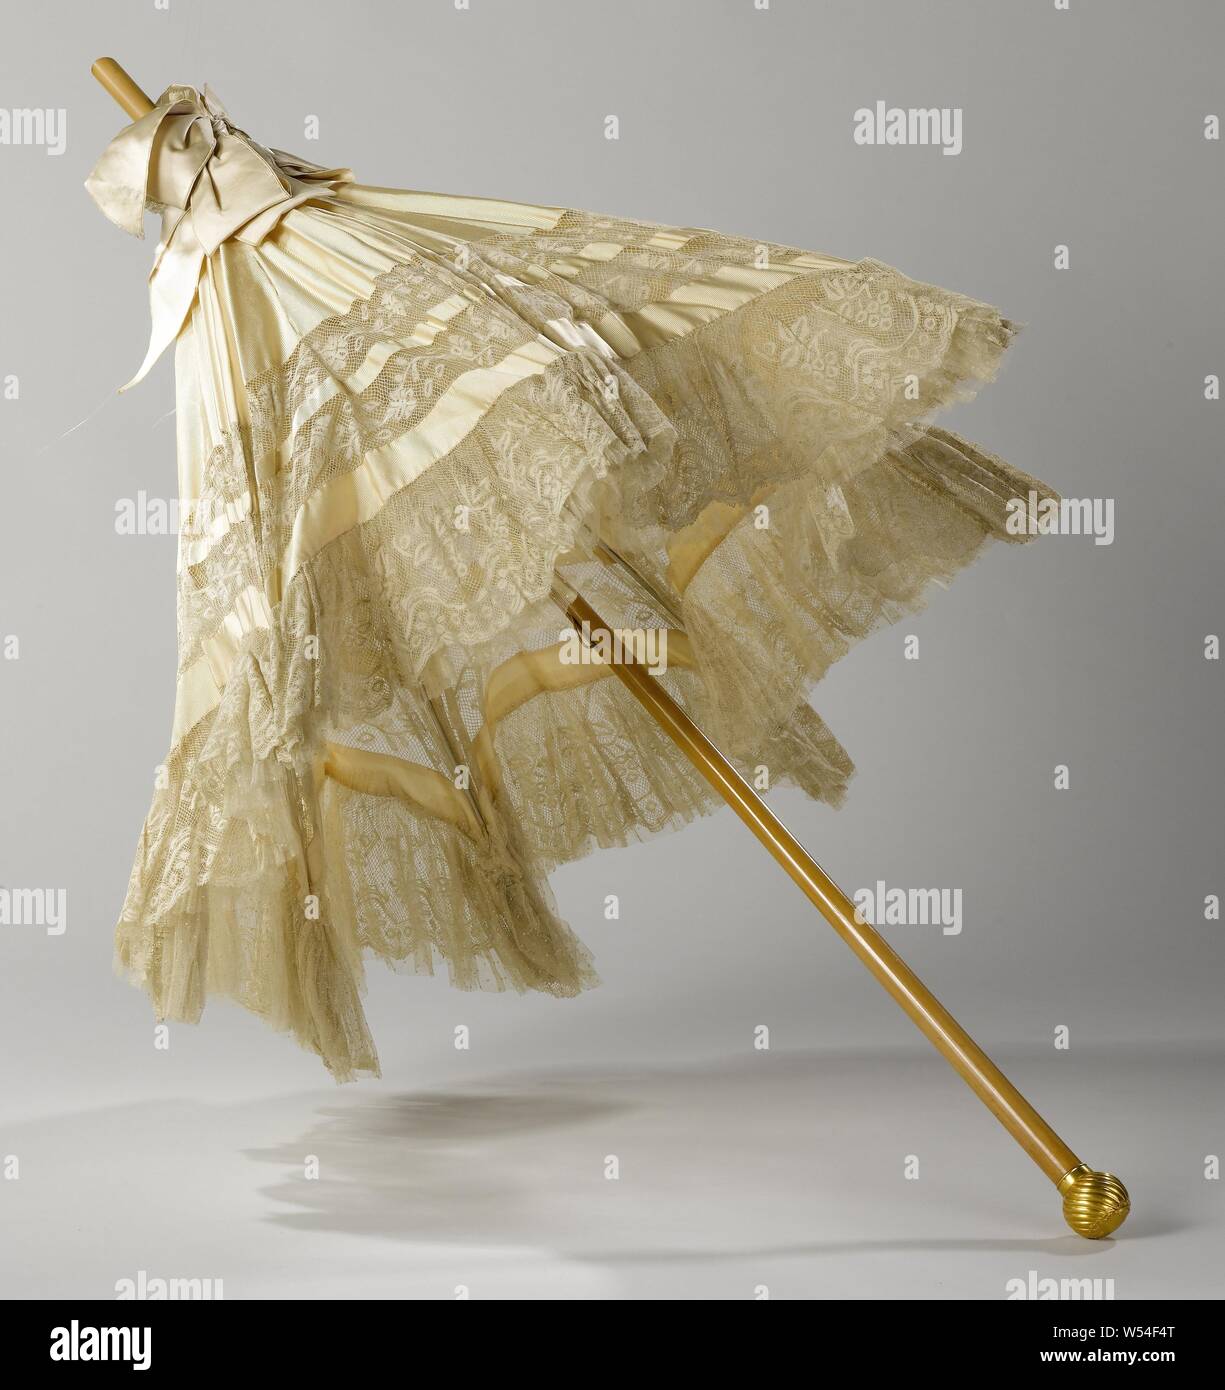 Parasol with machine-made lace Parasol with creme-colored ripping-side deck with a strip of machine-made Valenciennes lace, on light wooden stick with a twisted brass button with rocaille ornaments, Parasol with crêm-colored ripping-side deck on which a strip from the Valenciennes mechanical side. Unlined, eight lined ribs. On top a cream colored silk bow. Light-colored wooden stick with a convex, twisted brass button with rocaille ornaments., M. Cazal, Paris, c. 1910, dek, stok, strik, knop, forging, l 97 cm l 56 cm × s 86 cm d 17 cm Stock Photo